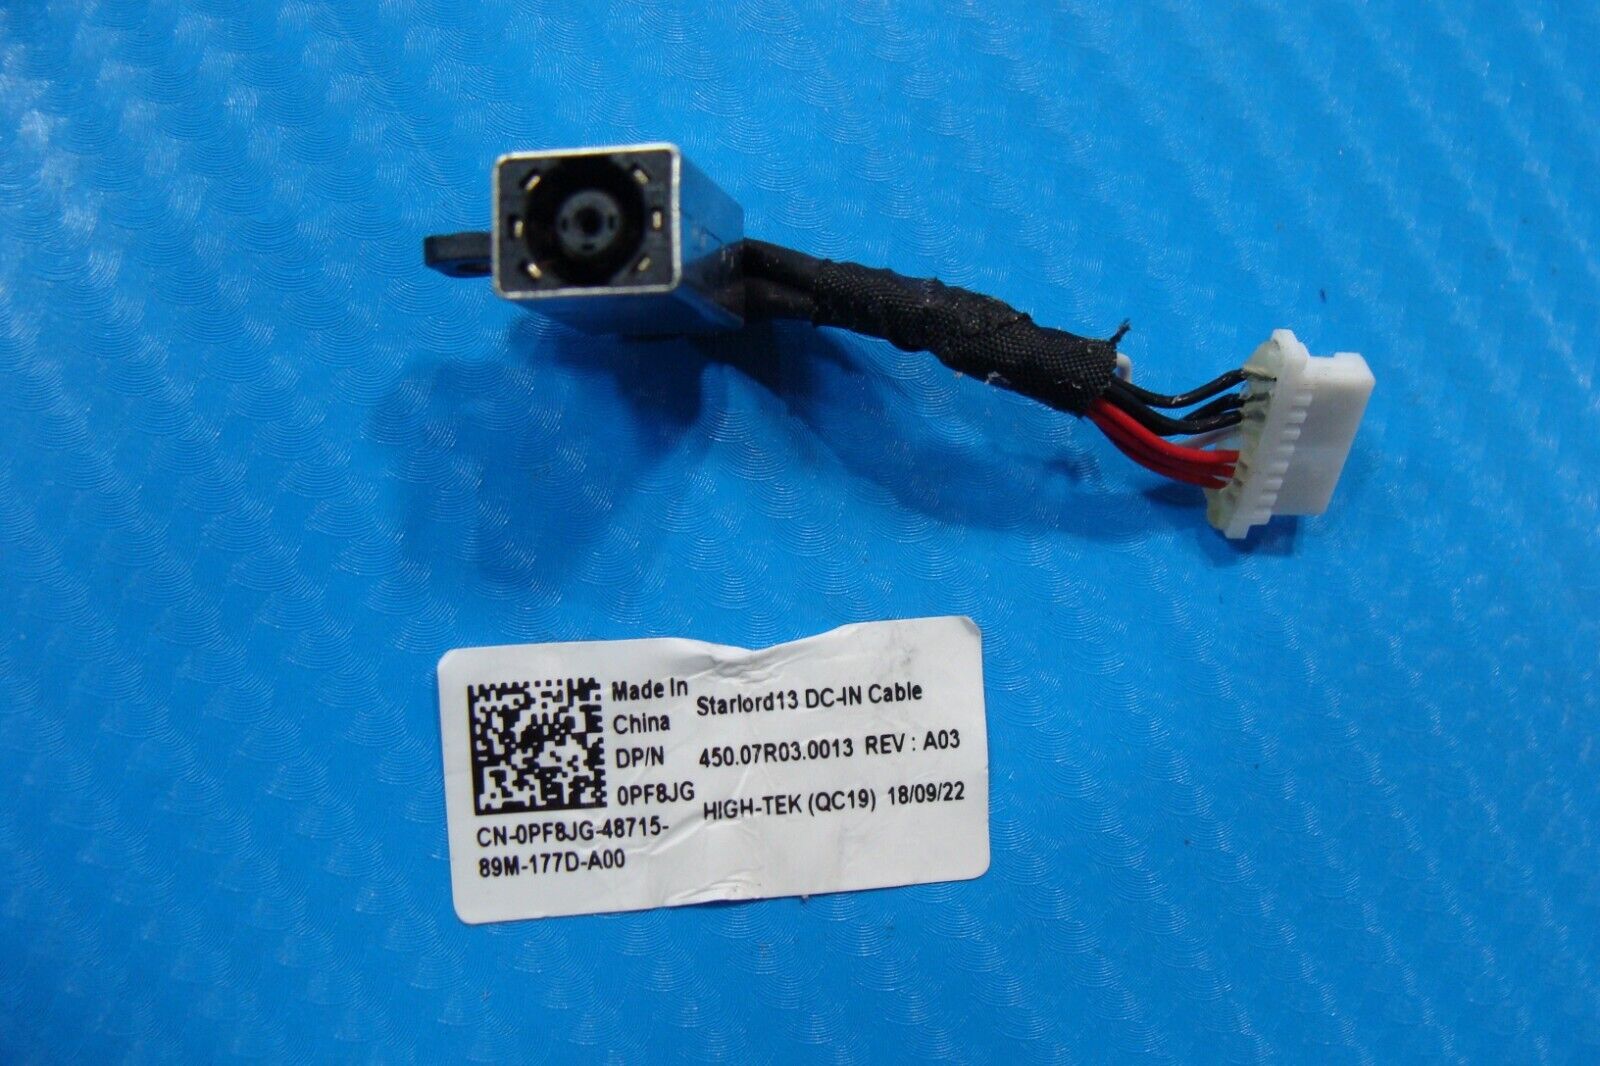 Dell Inspiron 15.6” 15 5579 2n1 DC IN Power Jack w/Cable PF8JG 450.07R03.0013